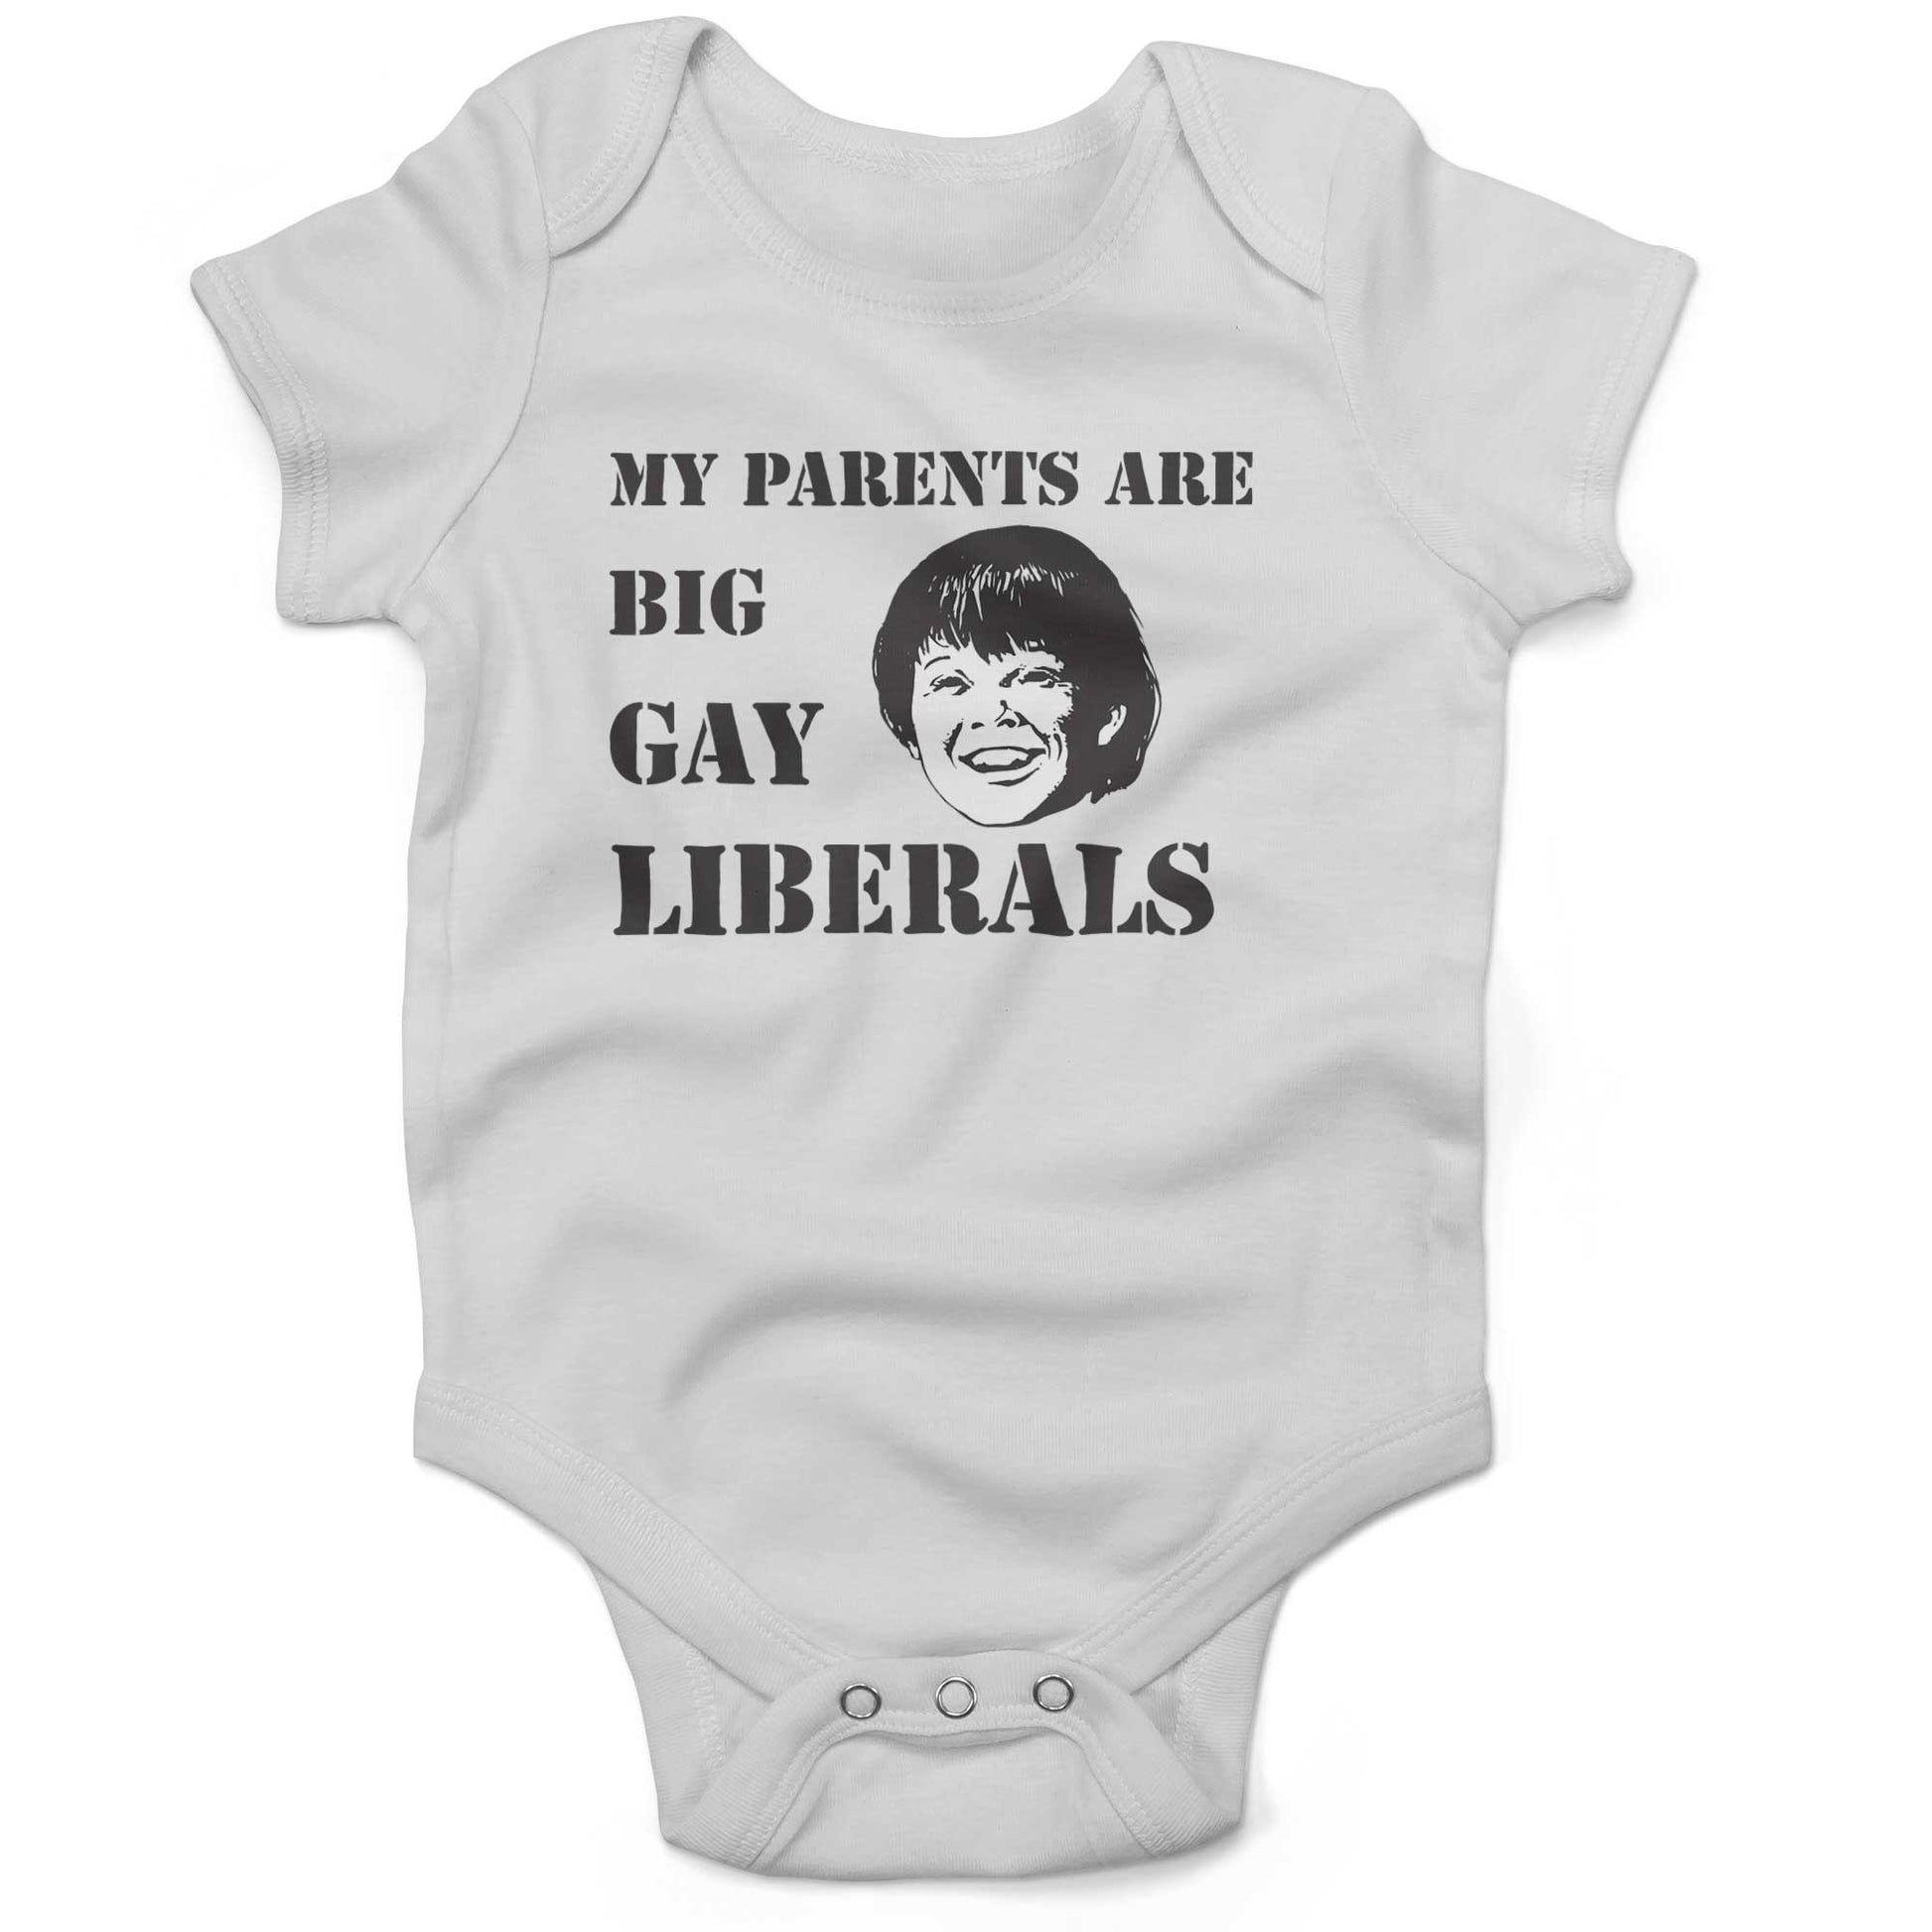 My Parents Are Big, Gay Liberals Infant Bodysuit or Raglan Baby Tee-White-3-6 months